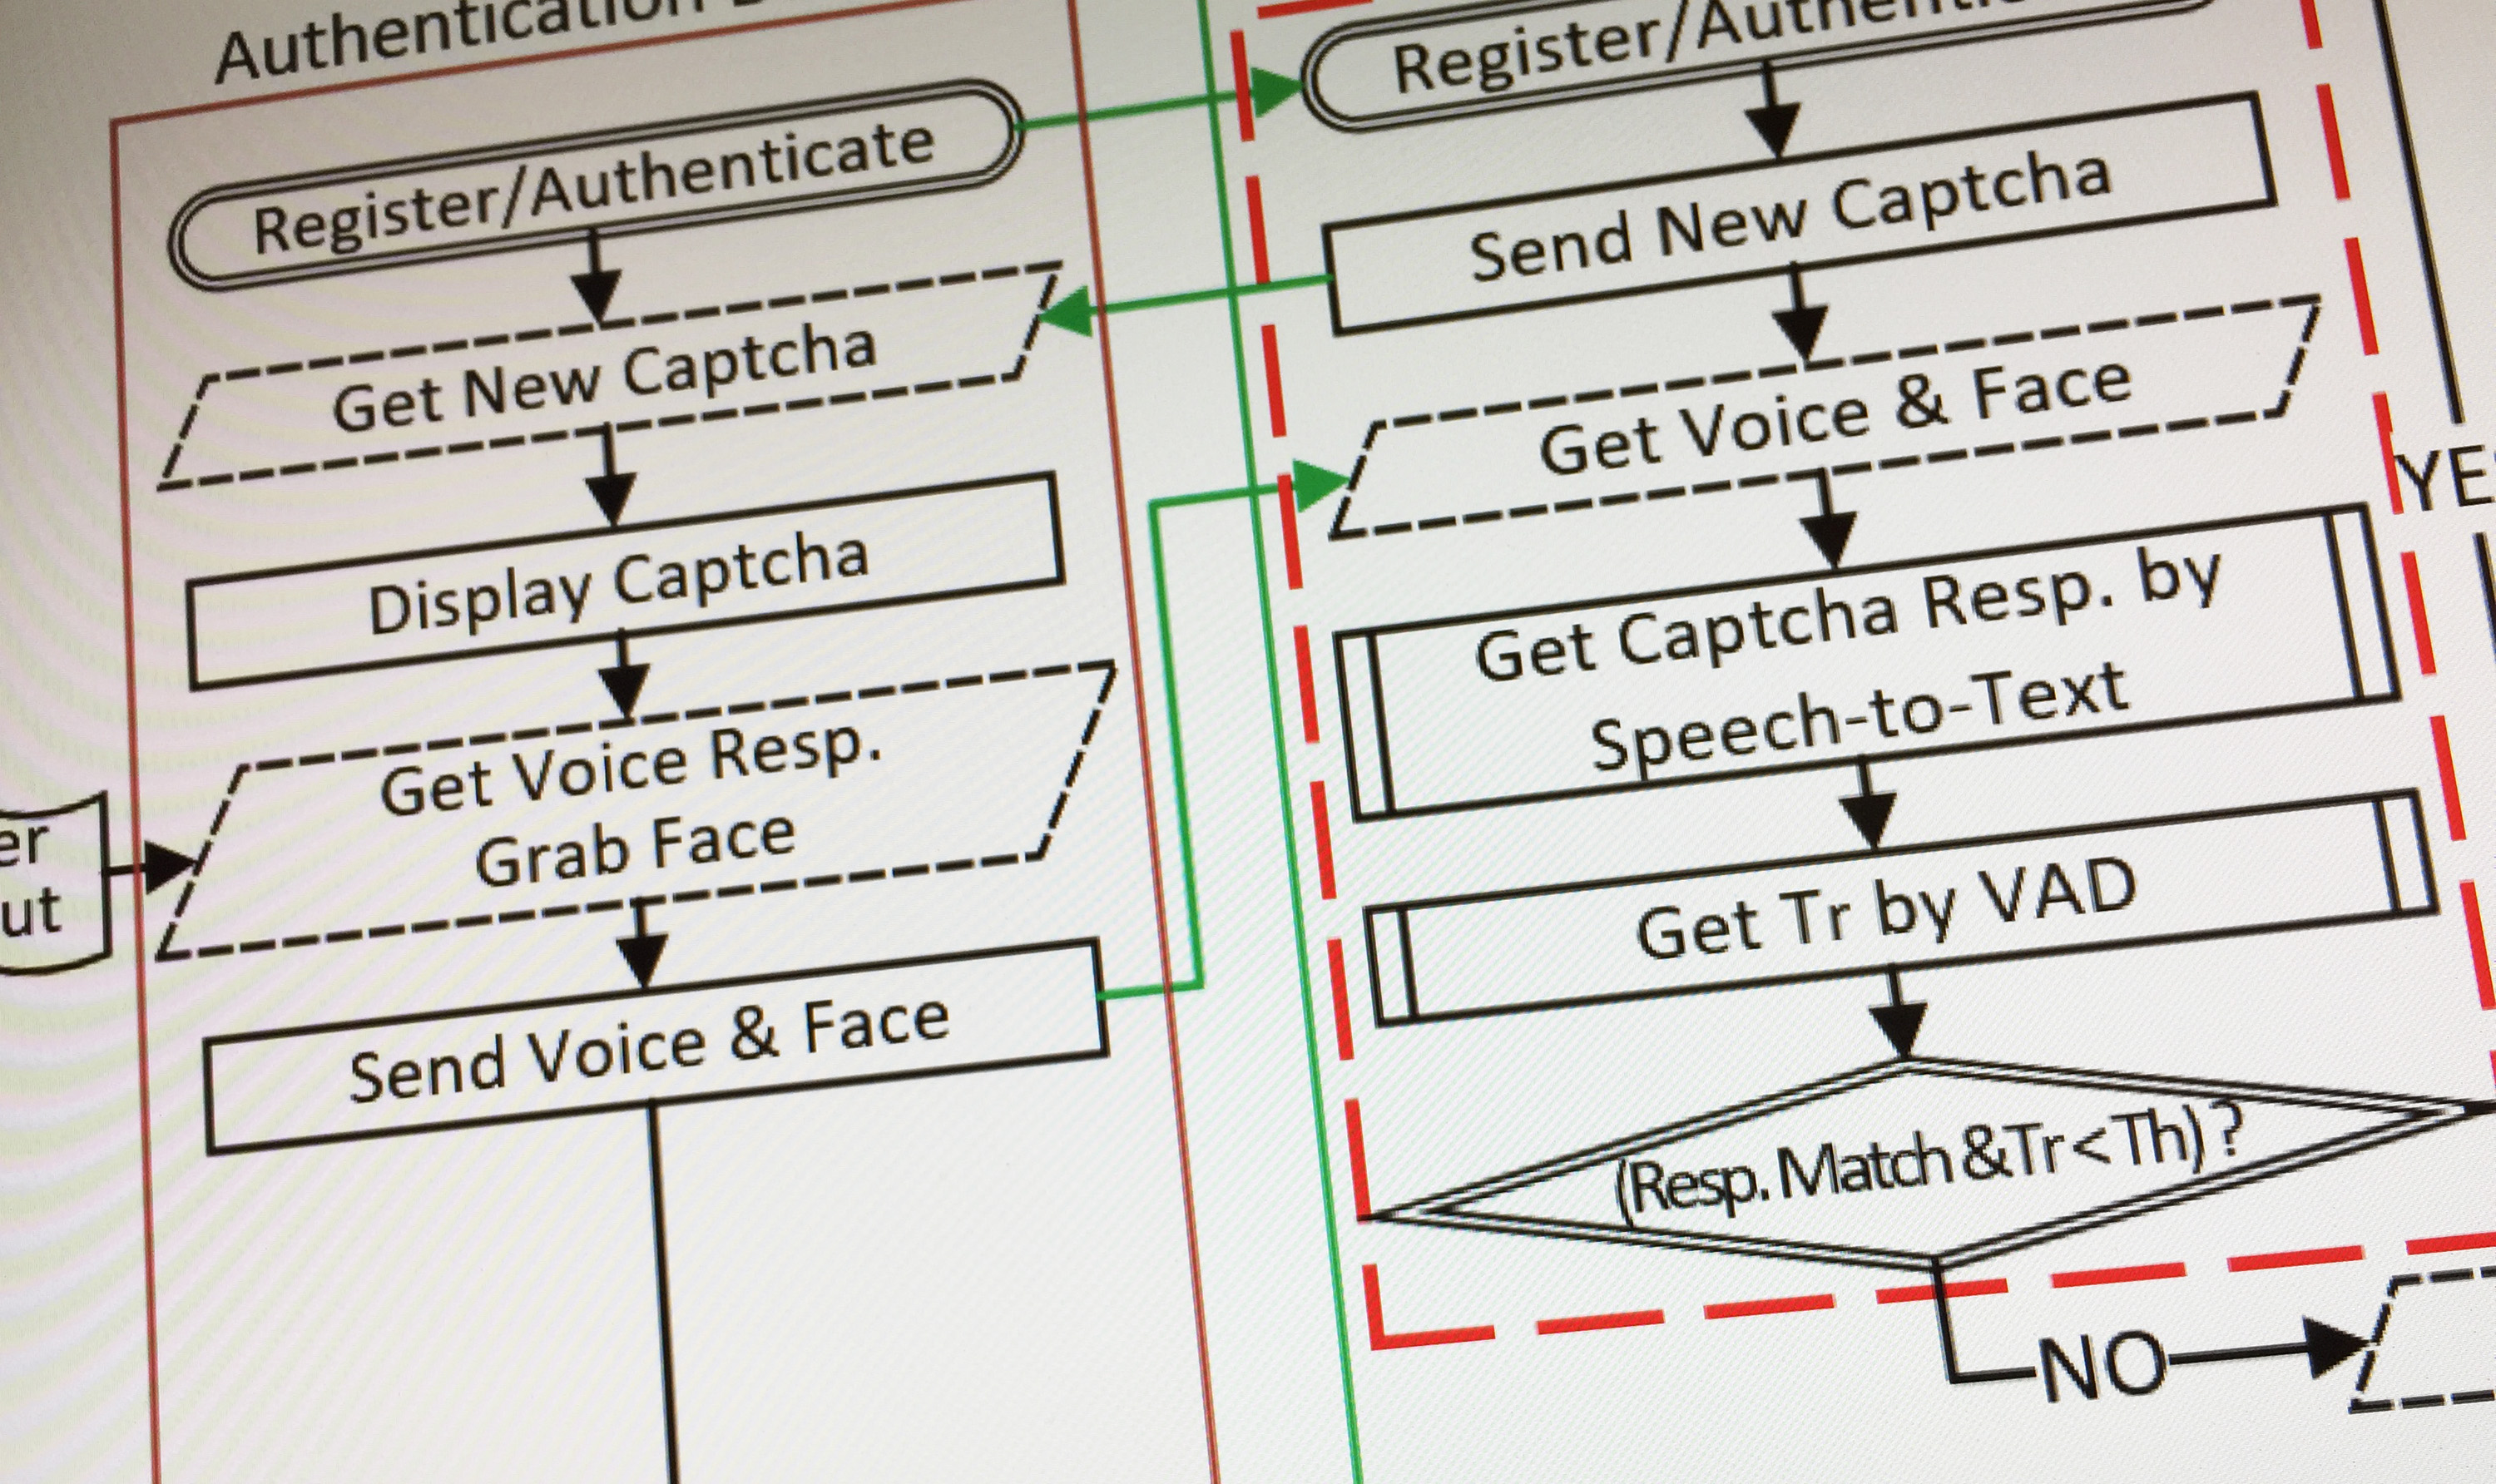 Image shows part of the flow diagram of the Real-Time Captcha.